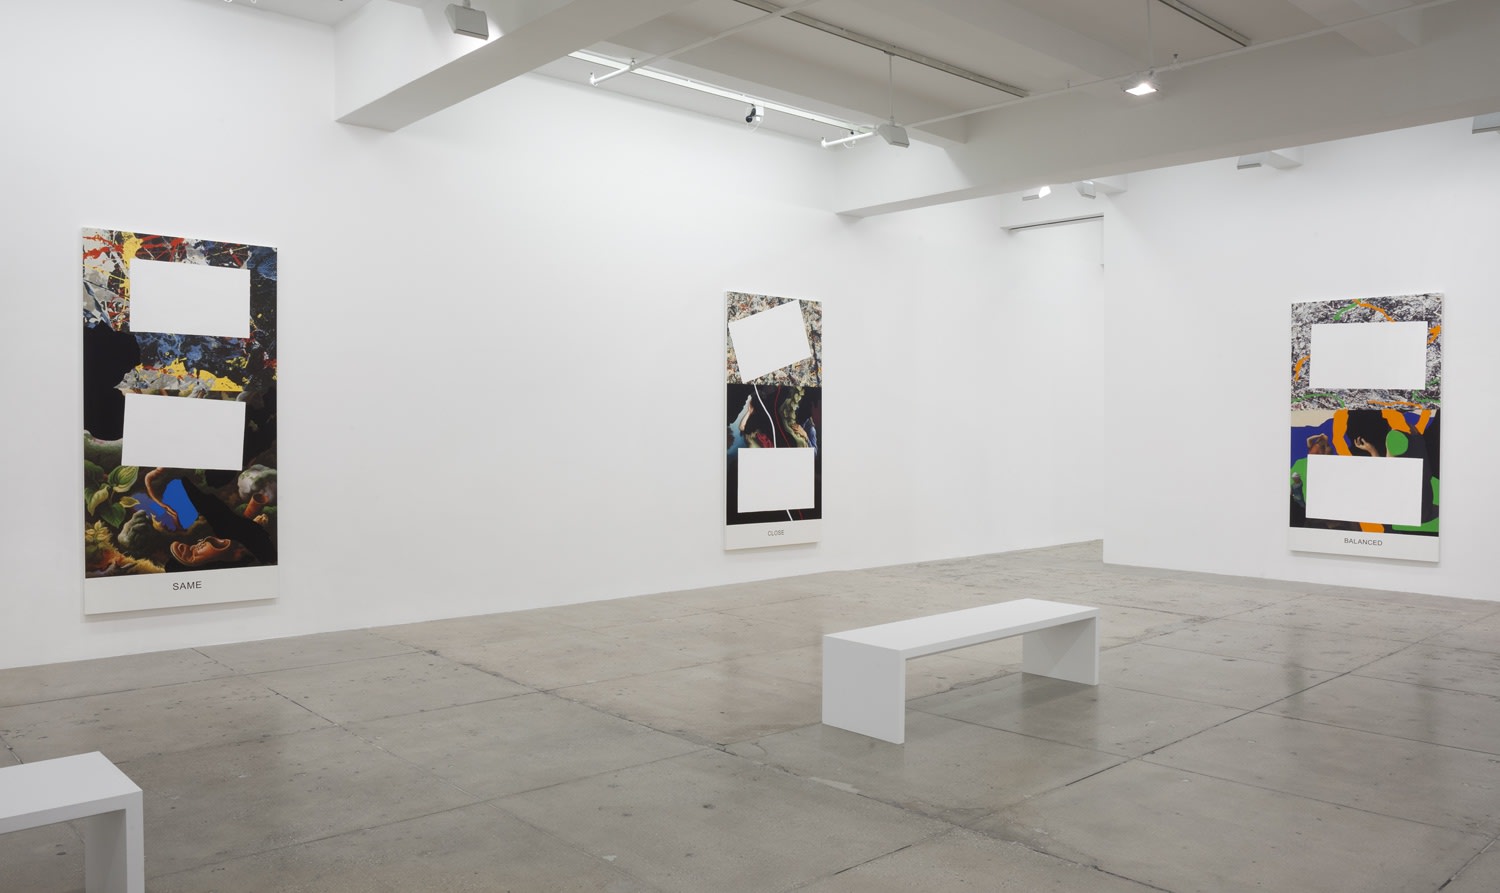 3 paintings partially covered with white rectangles hanging in a gallery space.